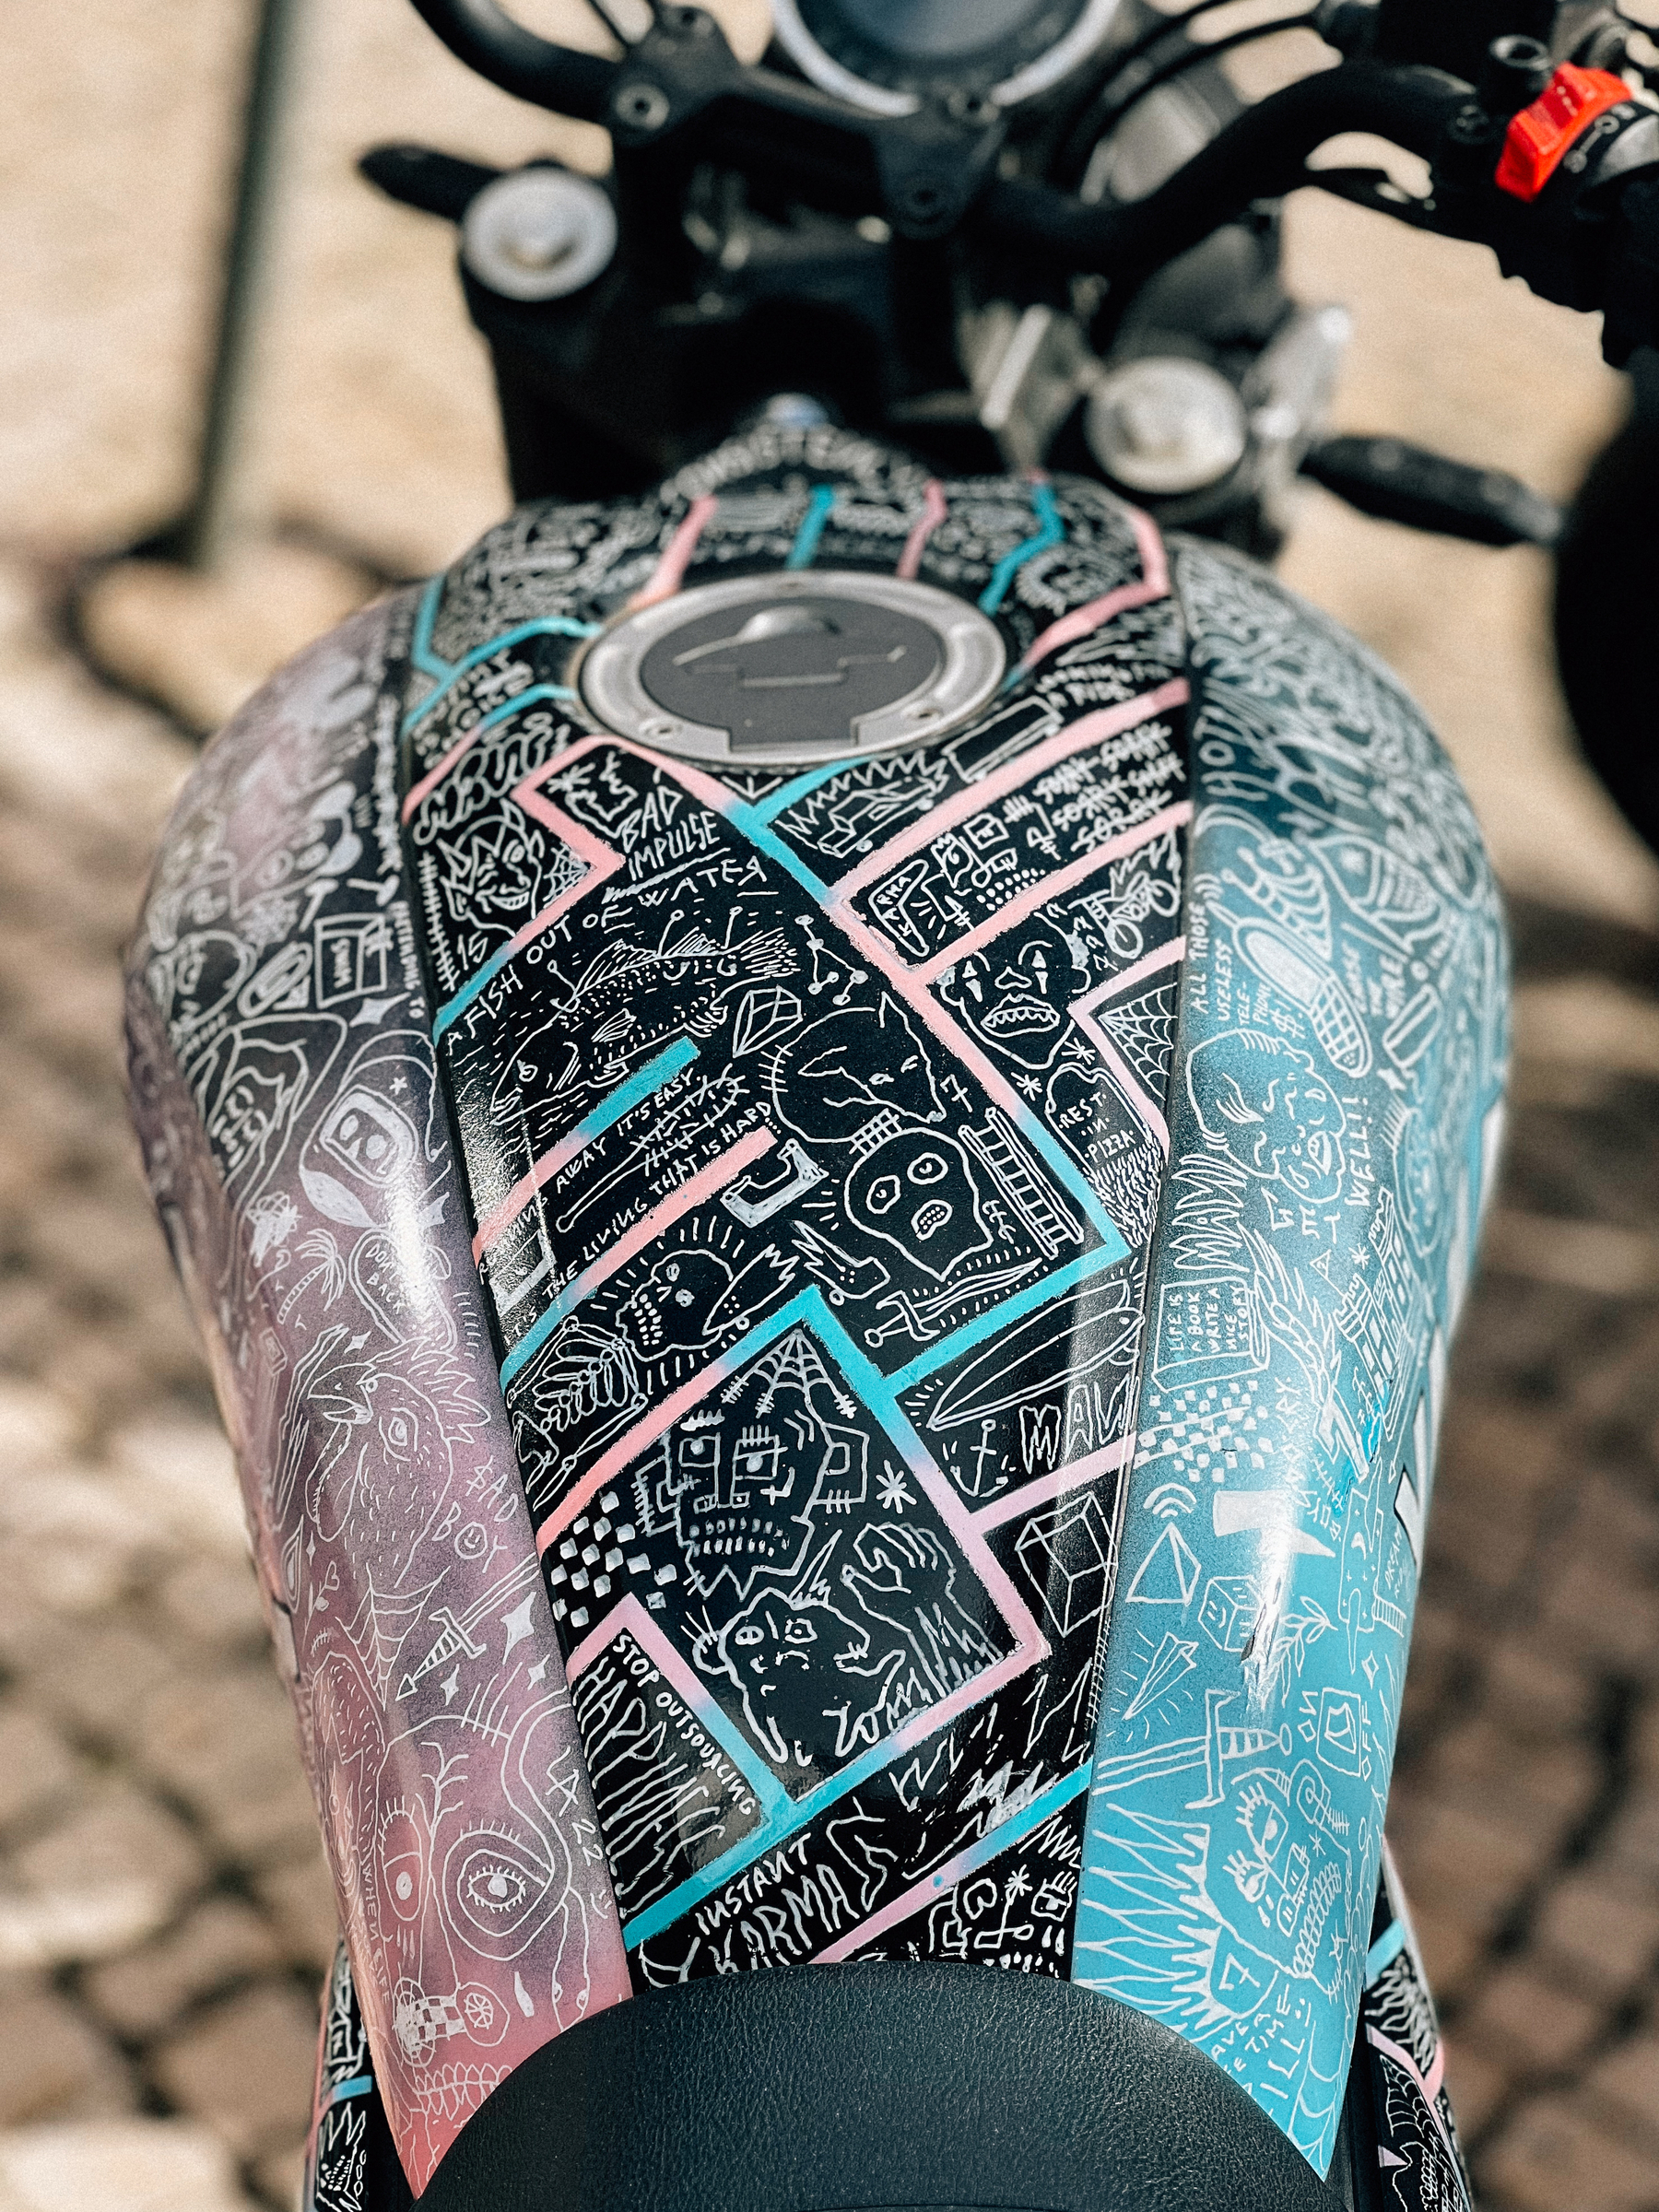 A motorcycle tank covered with colorful, detailed graffiti-style artwork, in focus against a blurry background of motorcycle parts.